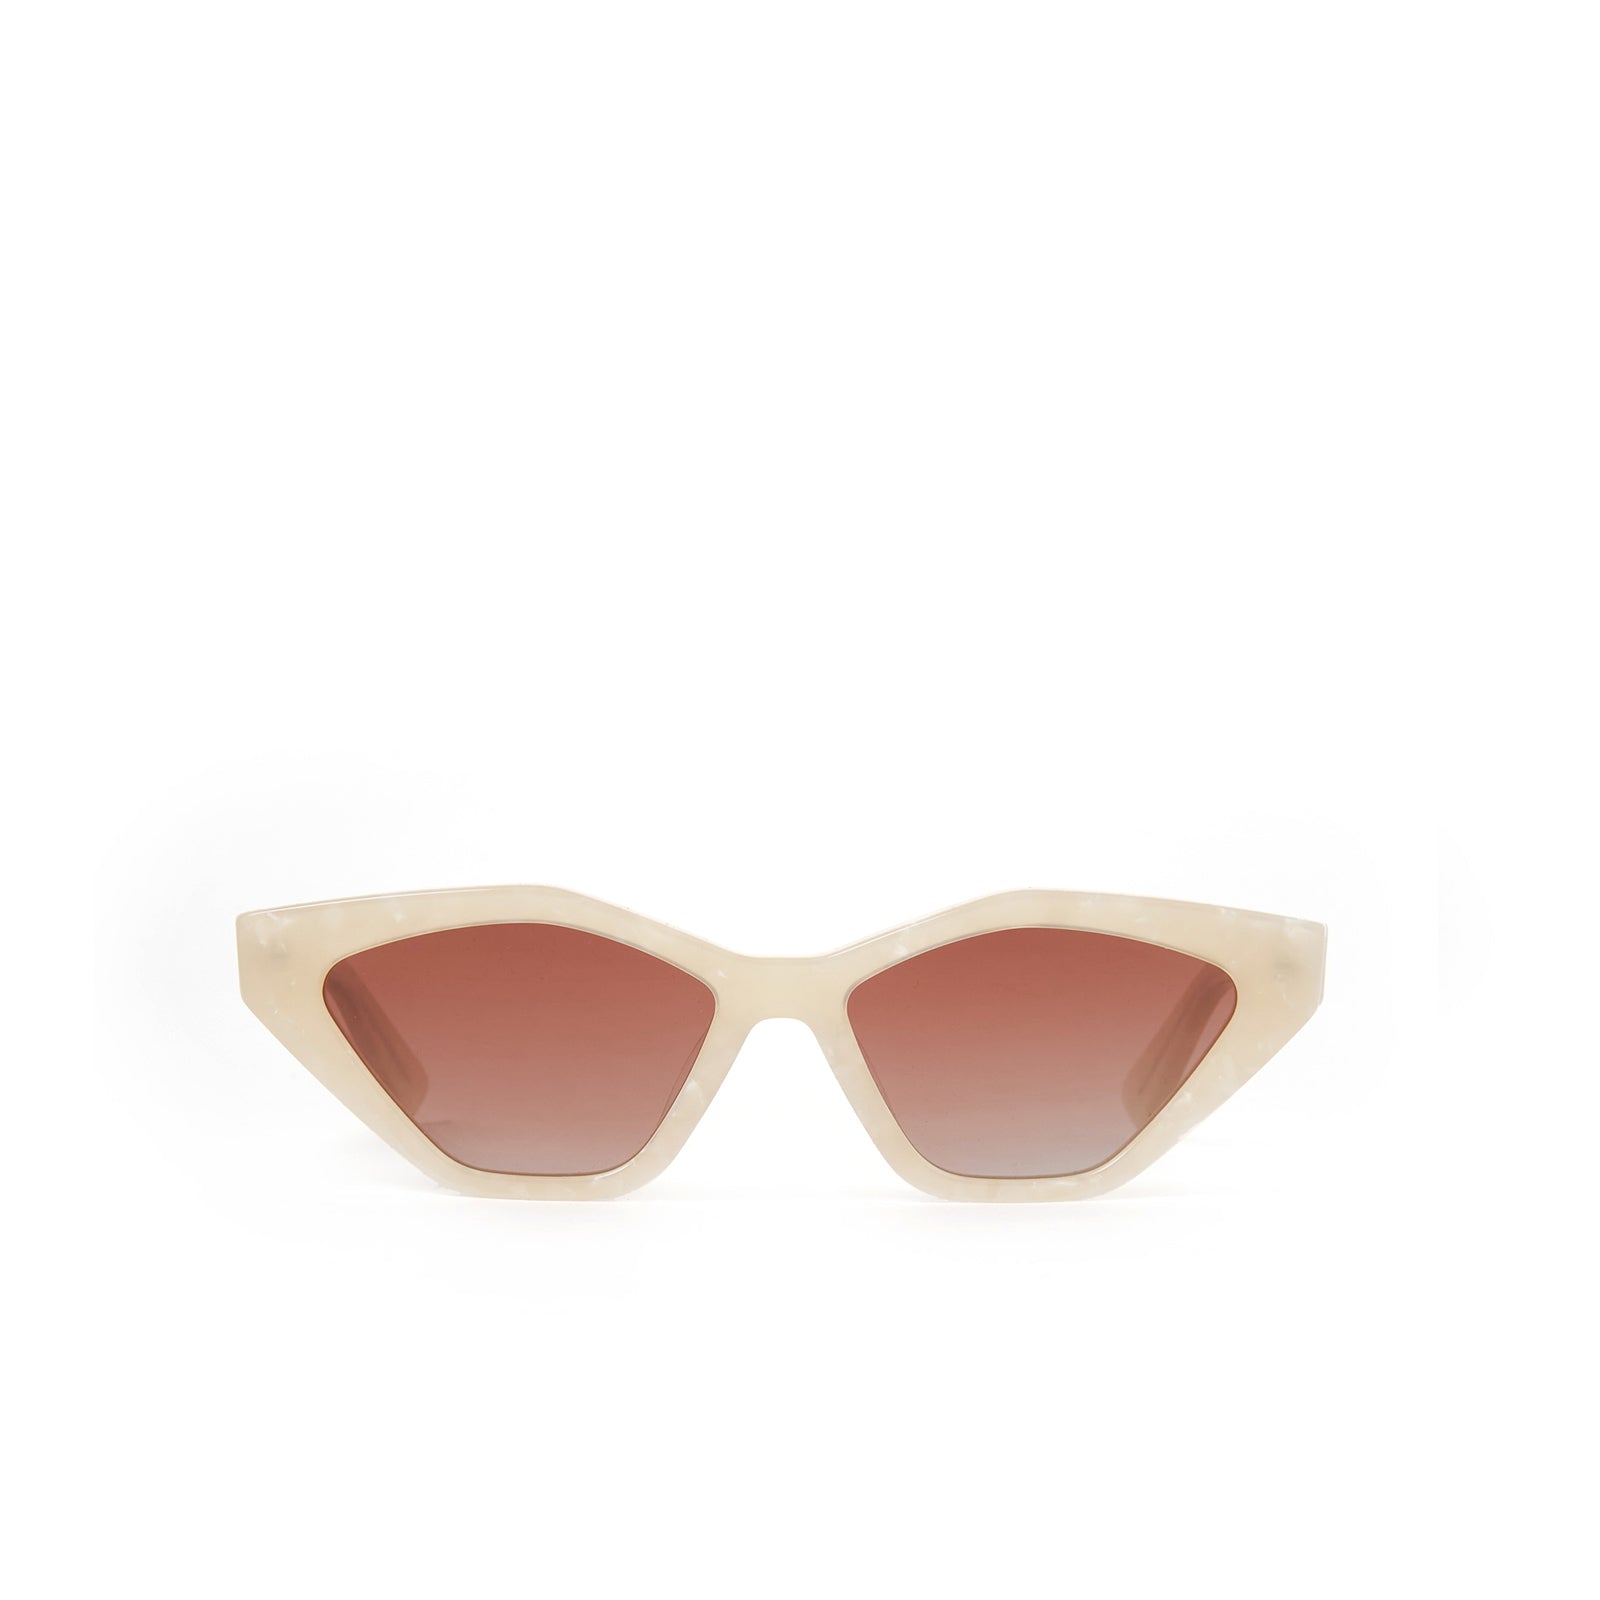 Arms Of Eve stylish white Jagger sunglasses with brown lenses, perfect for adding a touch of sophistication